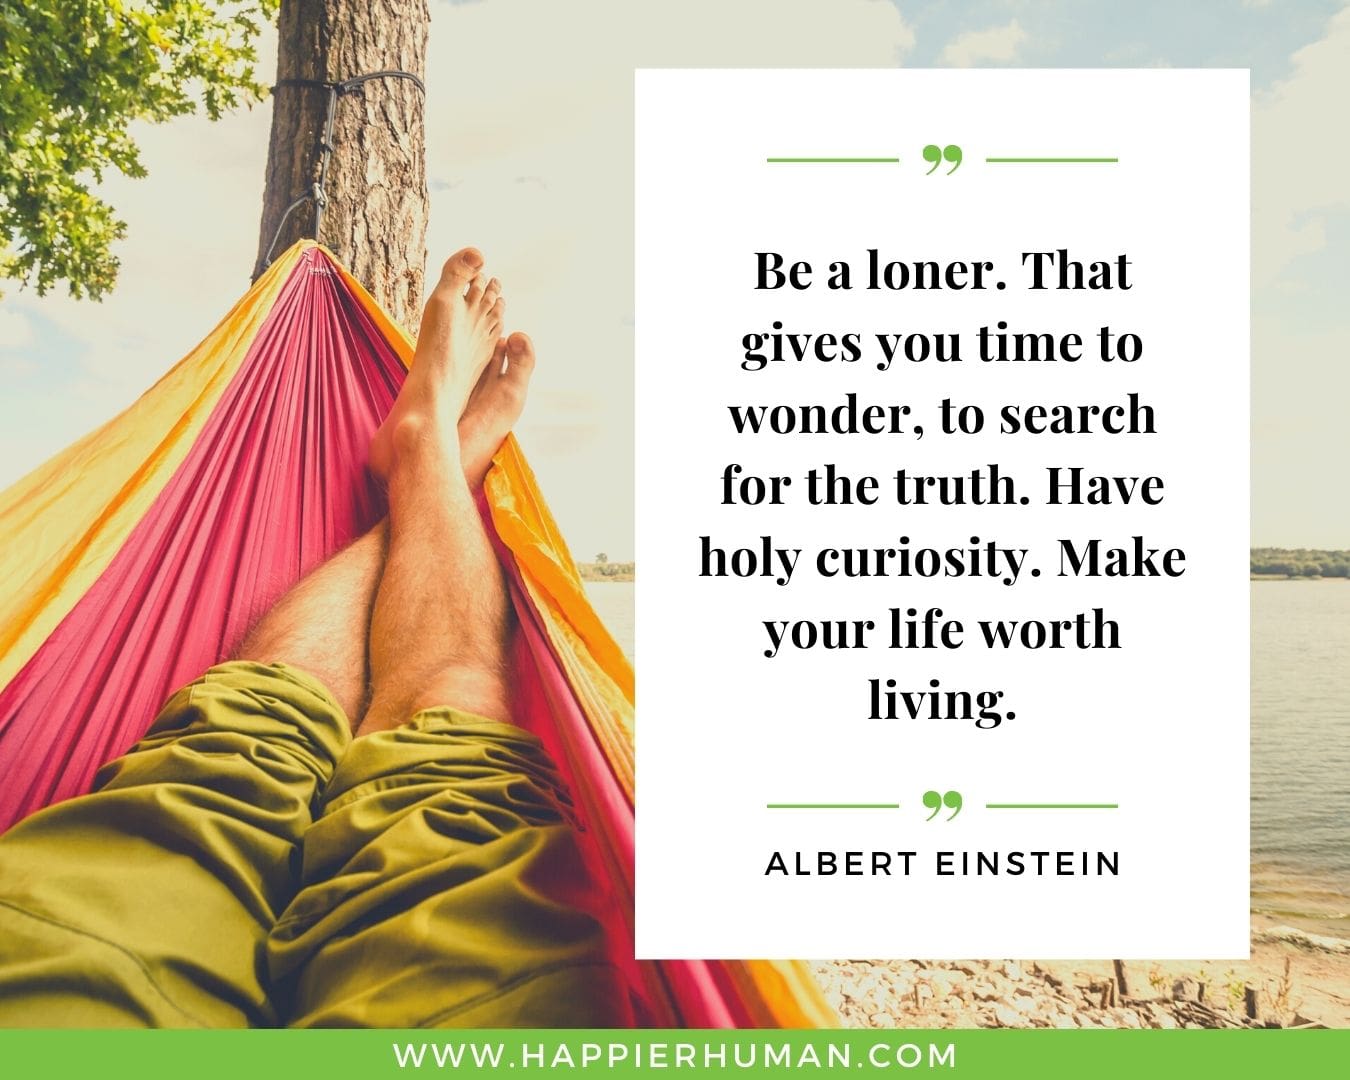 Loneliness Quotes - “Be a loner. That gives you time to wonder, to search for the truth. Have holy curiosity. Make your life worth living.”– Albert Einstein